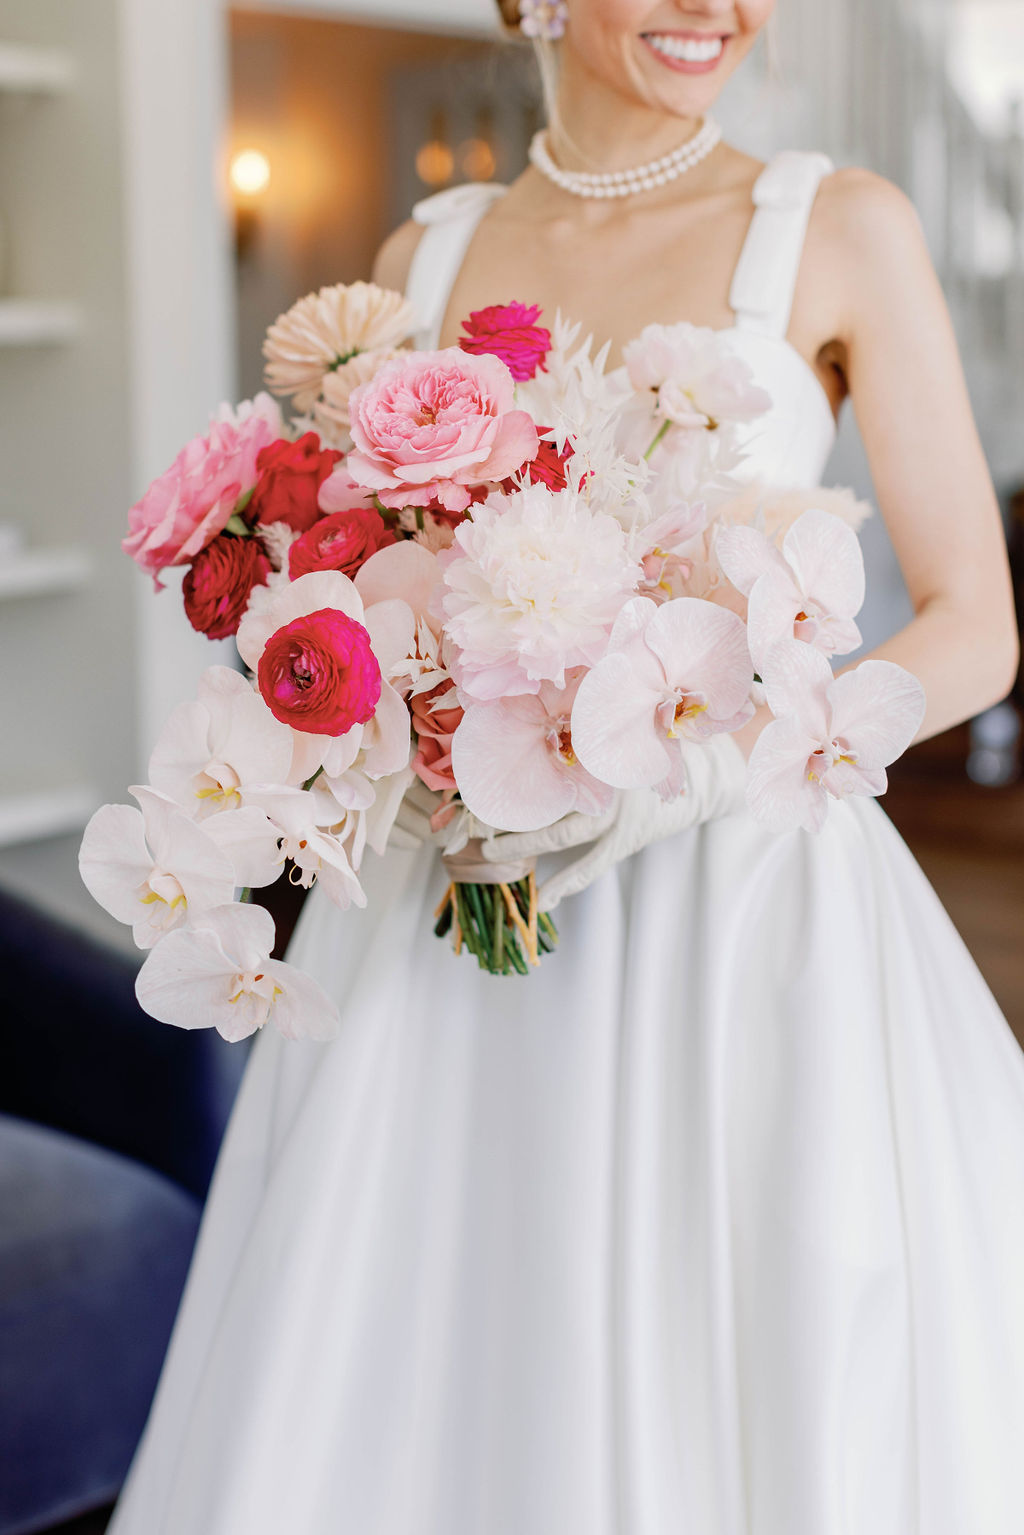 Close up of the bride's full wedding bouquet in shades of pink flowers at the Grand Lady wedding venue in Austin Texas. |Photographer Sarah Block of Sarah Block Photography